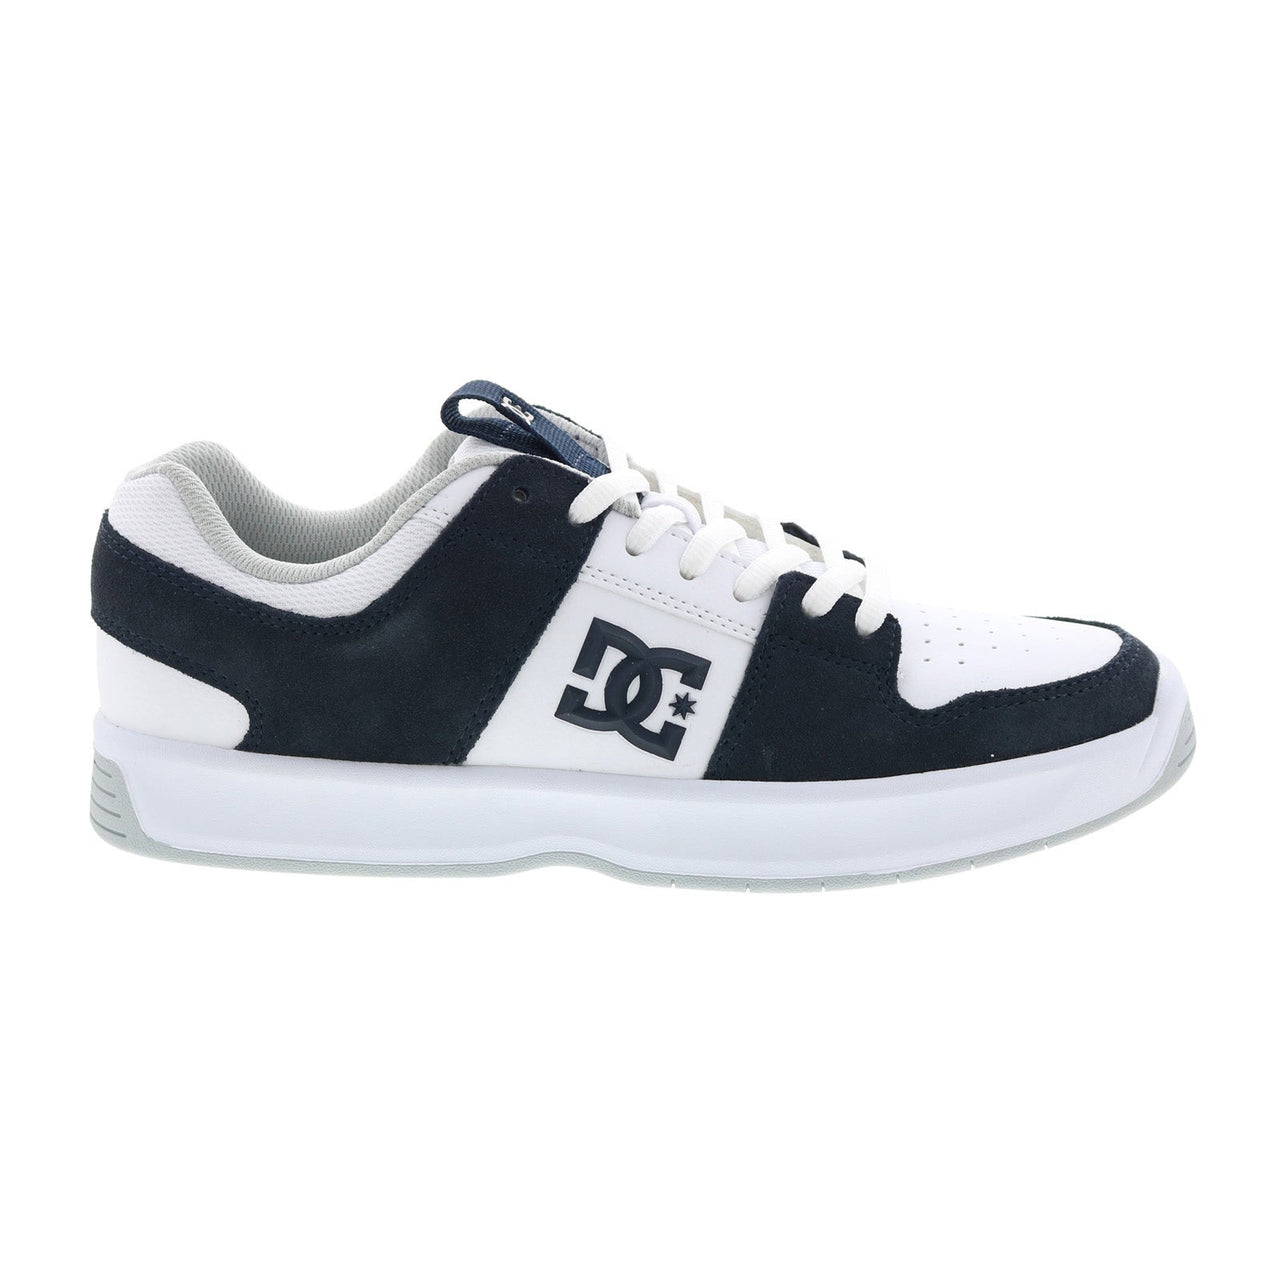 DC Lynx Zero ADYS100615-DCL Mens White Skate Inspired Sneakers Shoes ...